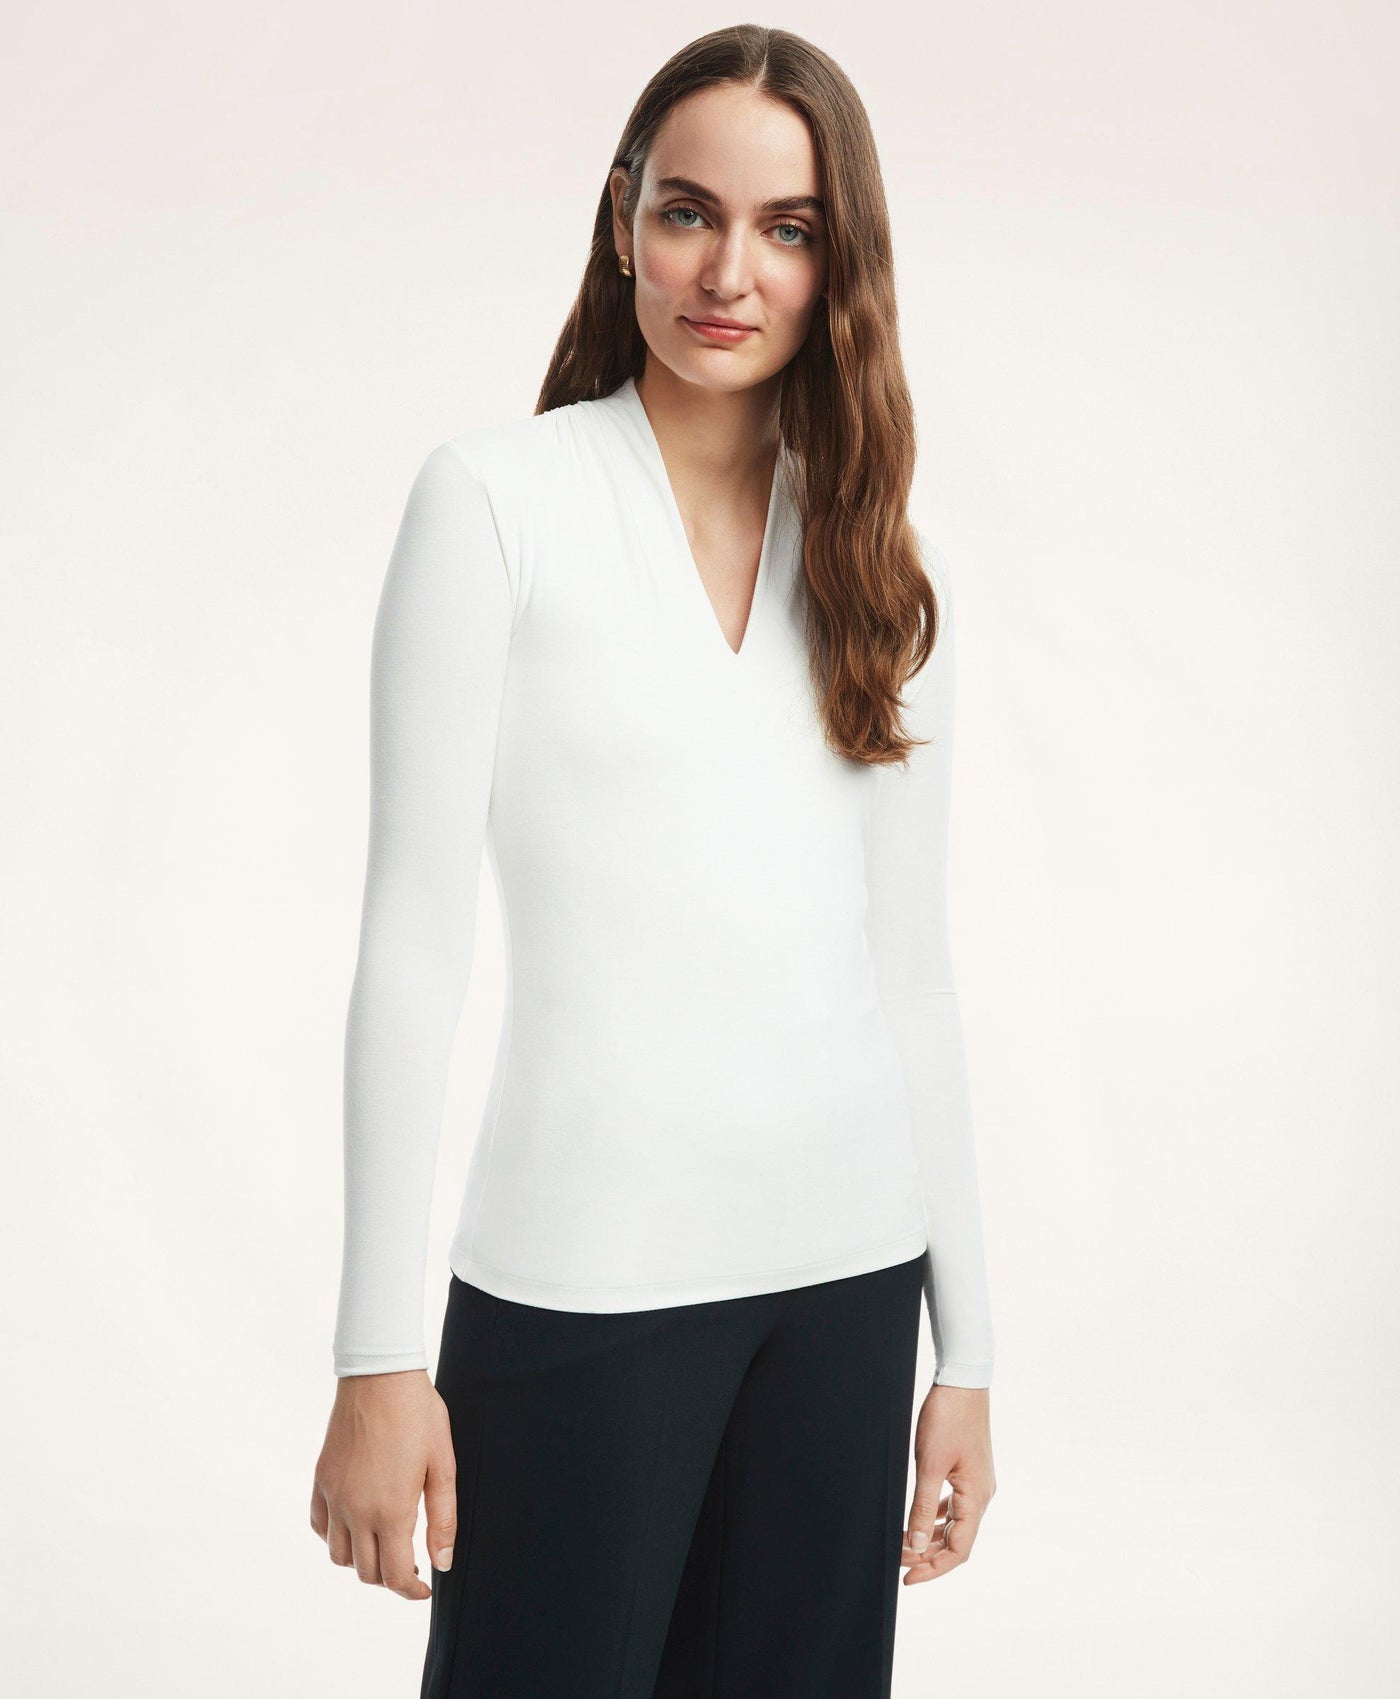 Draped Knit Top - Brooks Brothers Canada